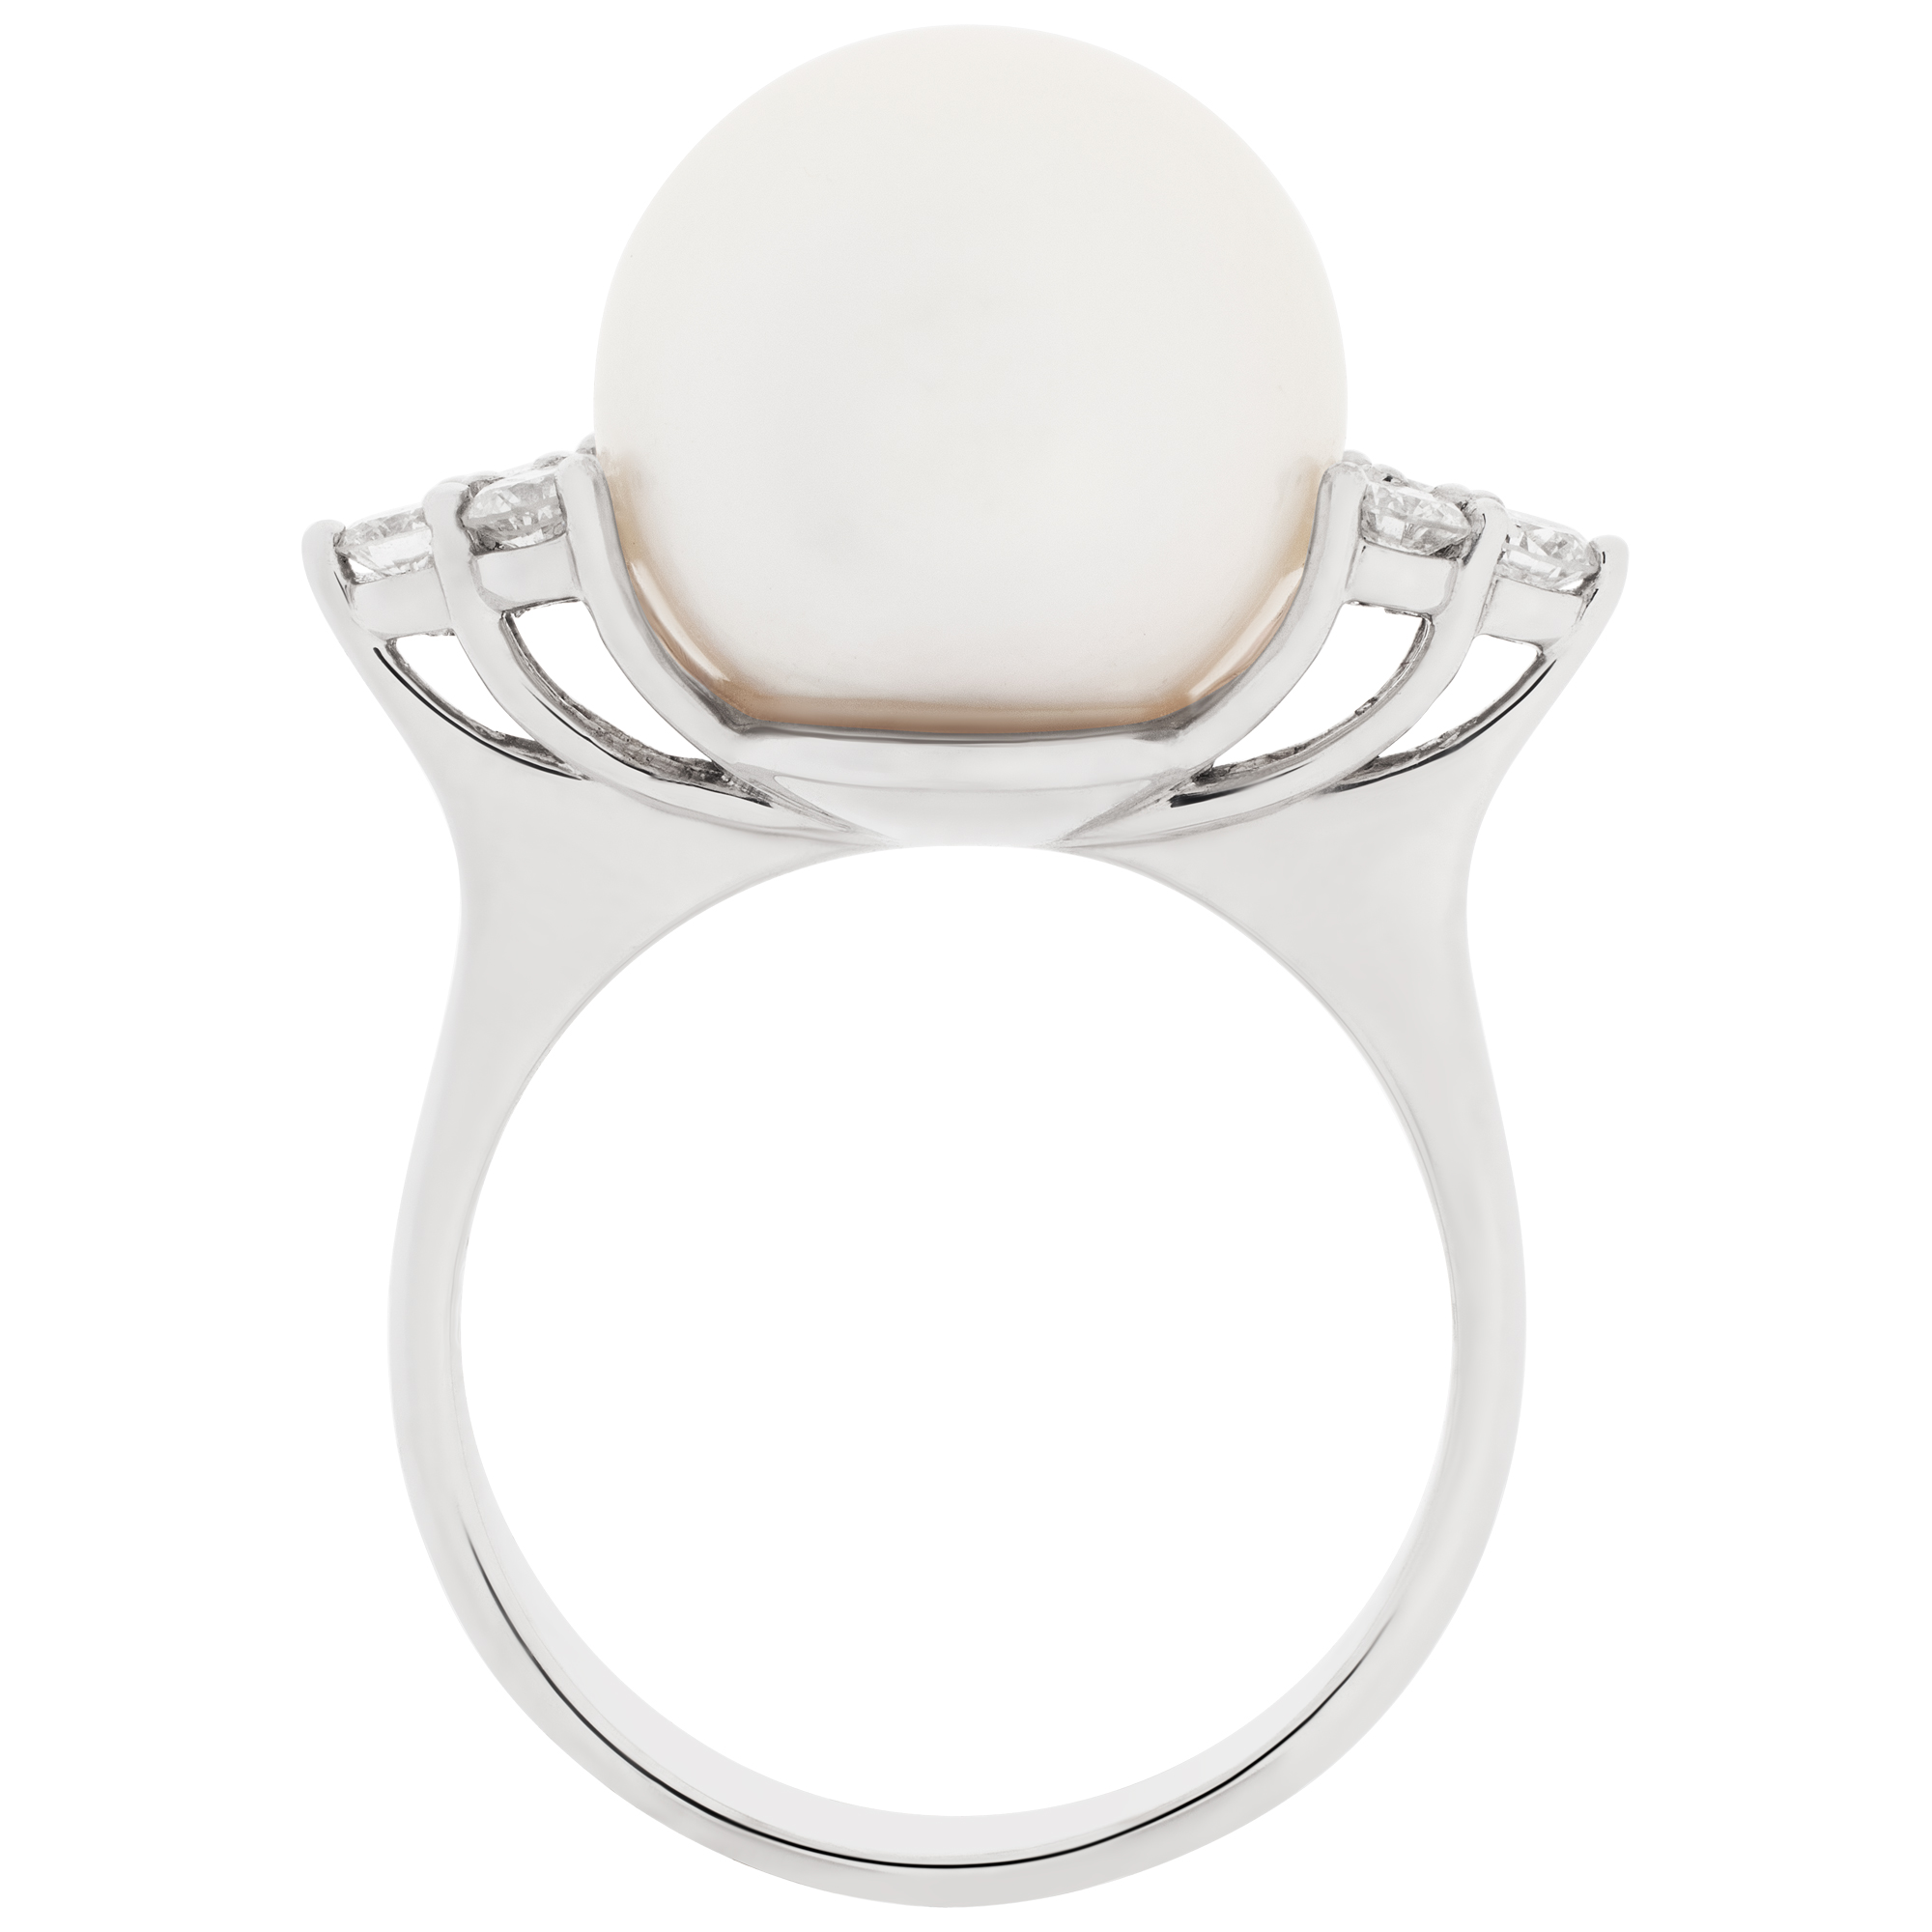 South Sea pearl & diamonds ring set in 18K white gold. Size 6.75 image 4